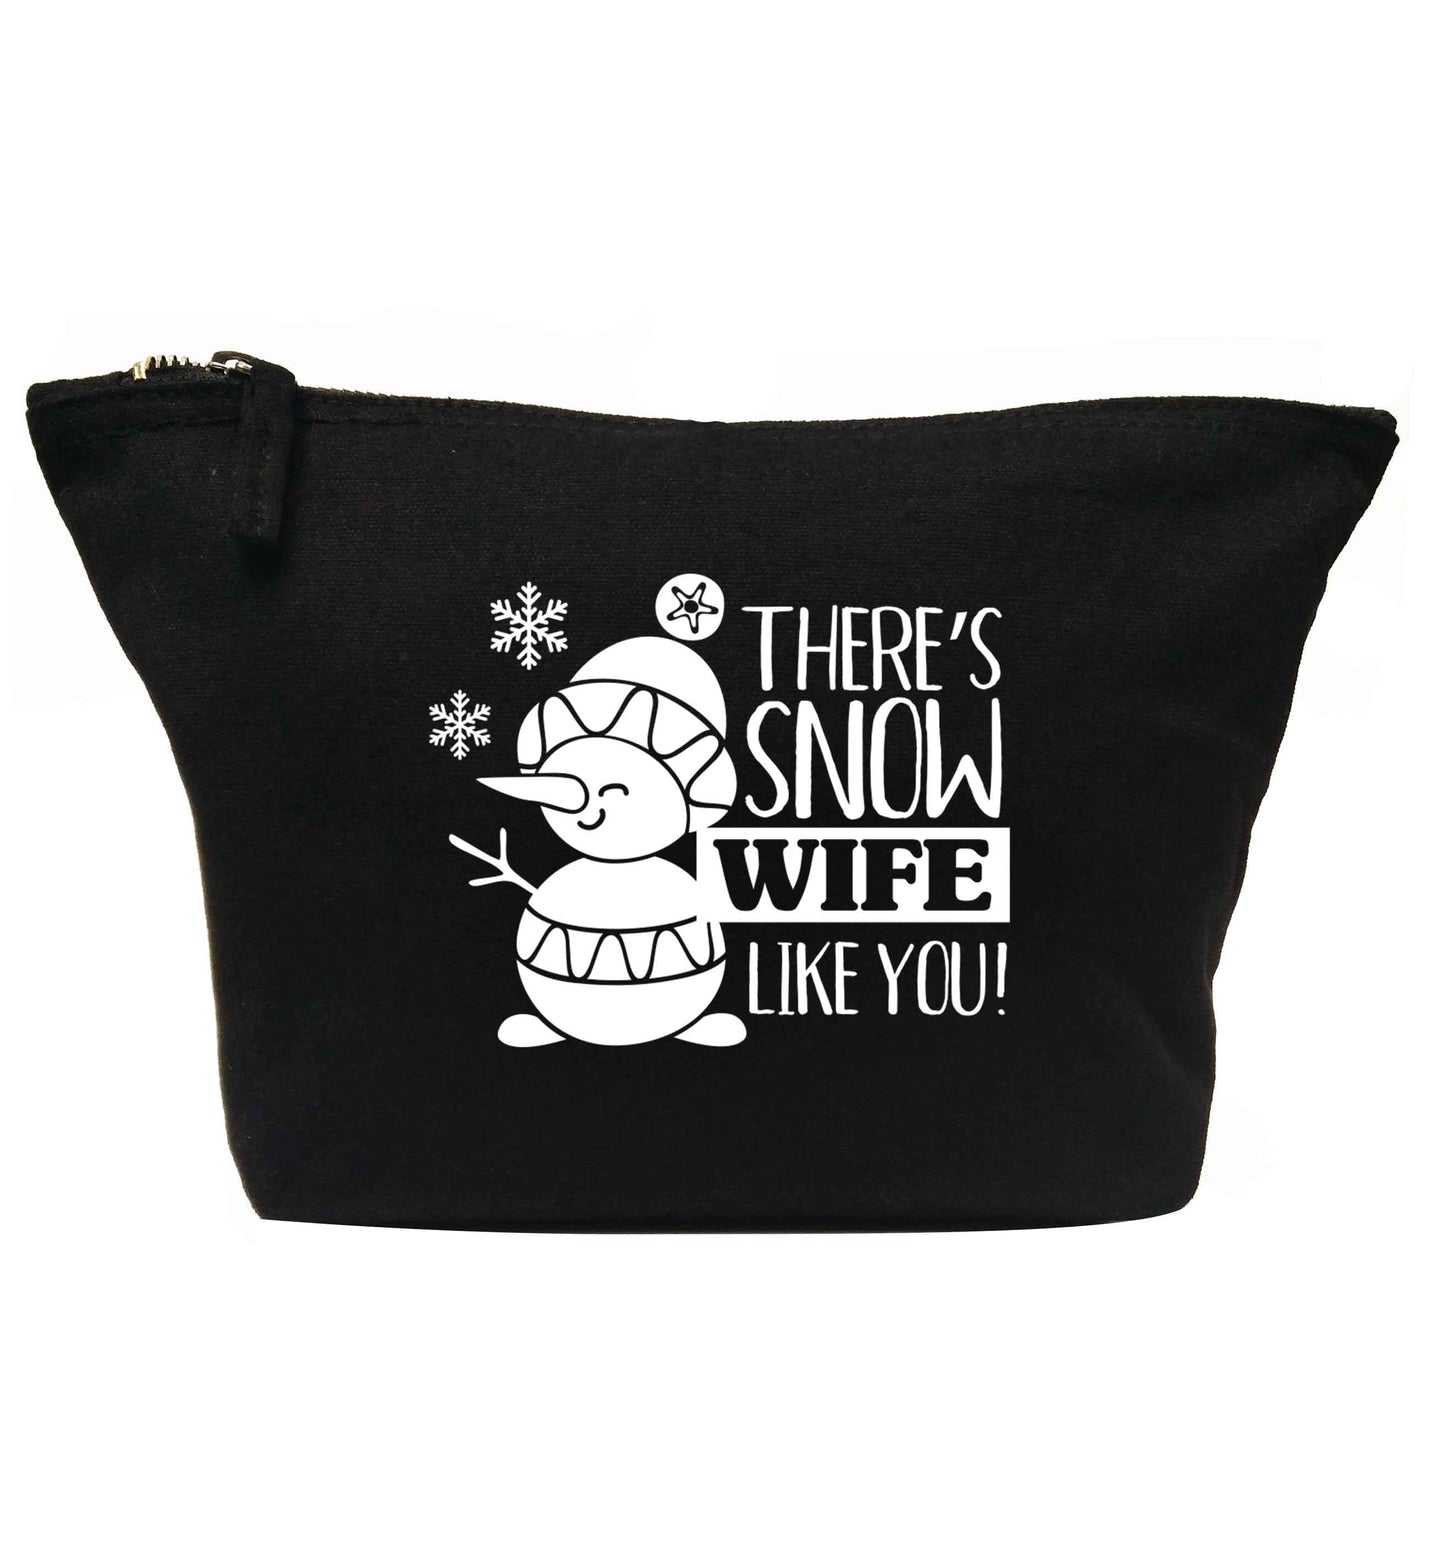 There's snow wife like you | Makeup / wash bag